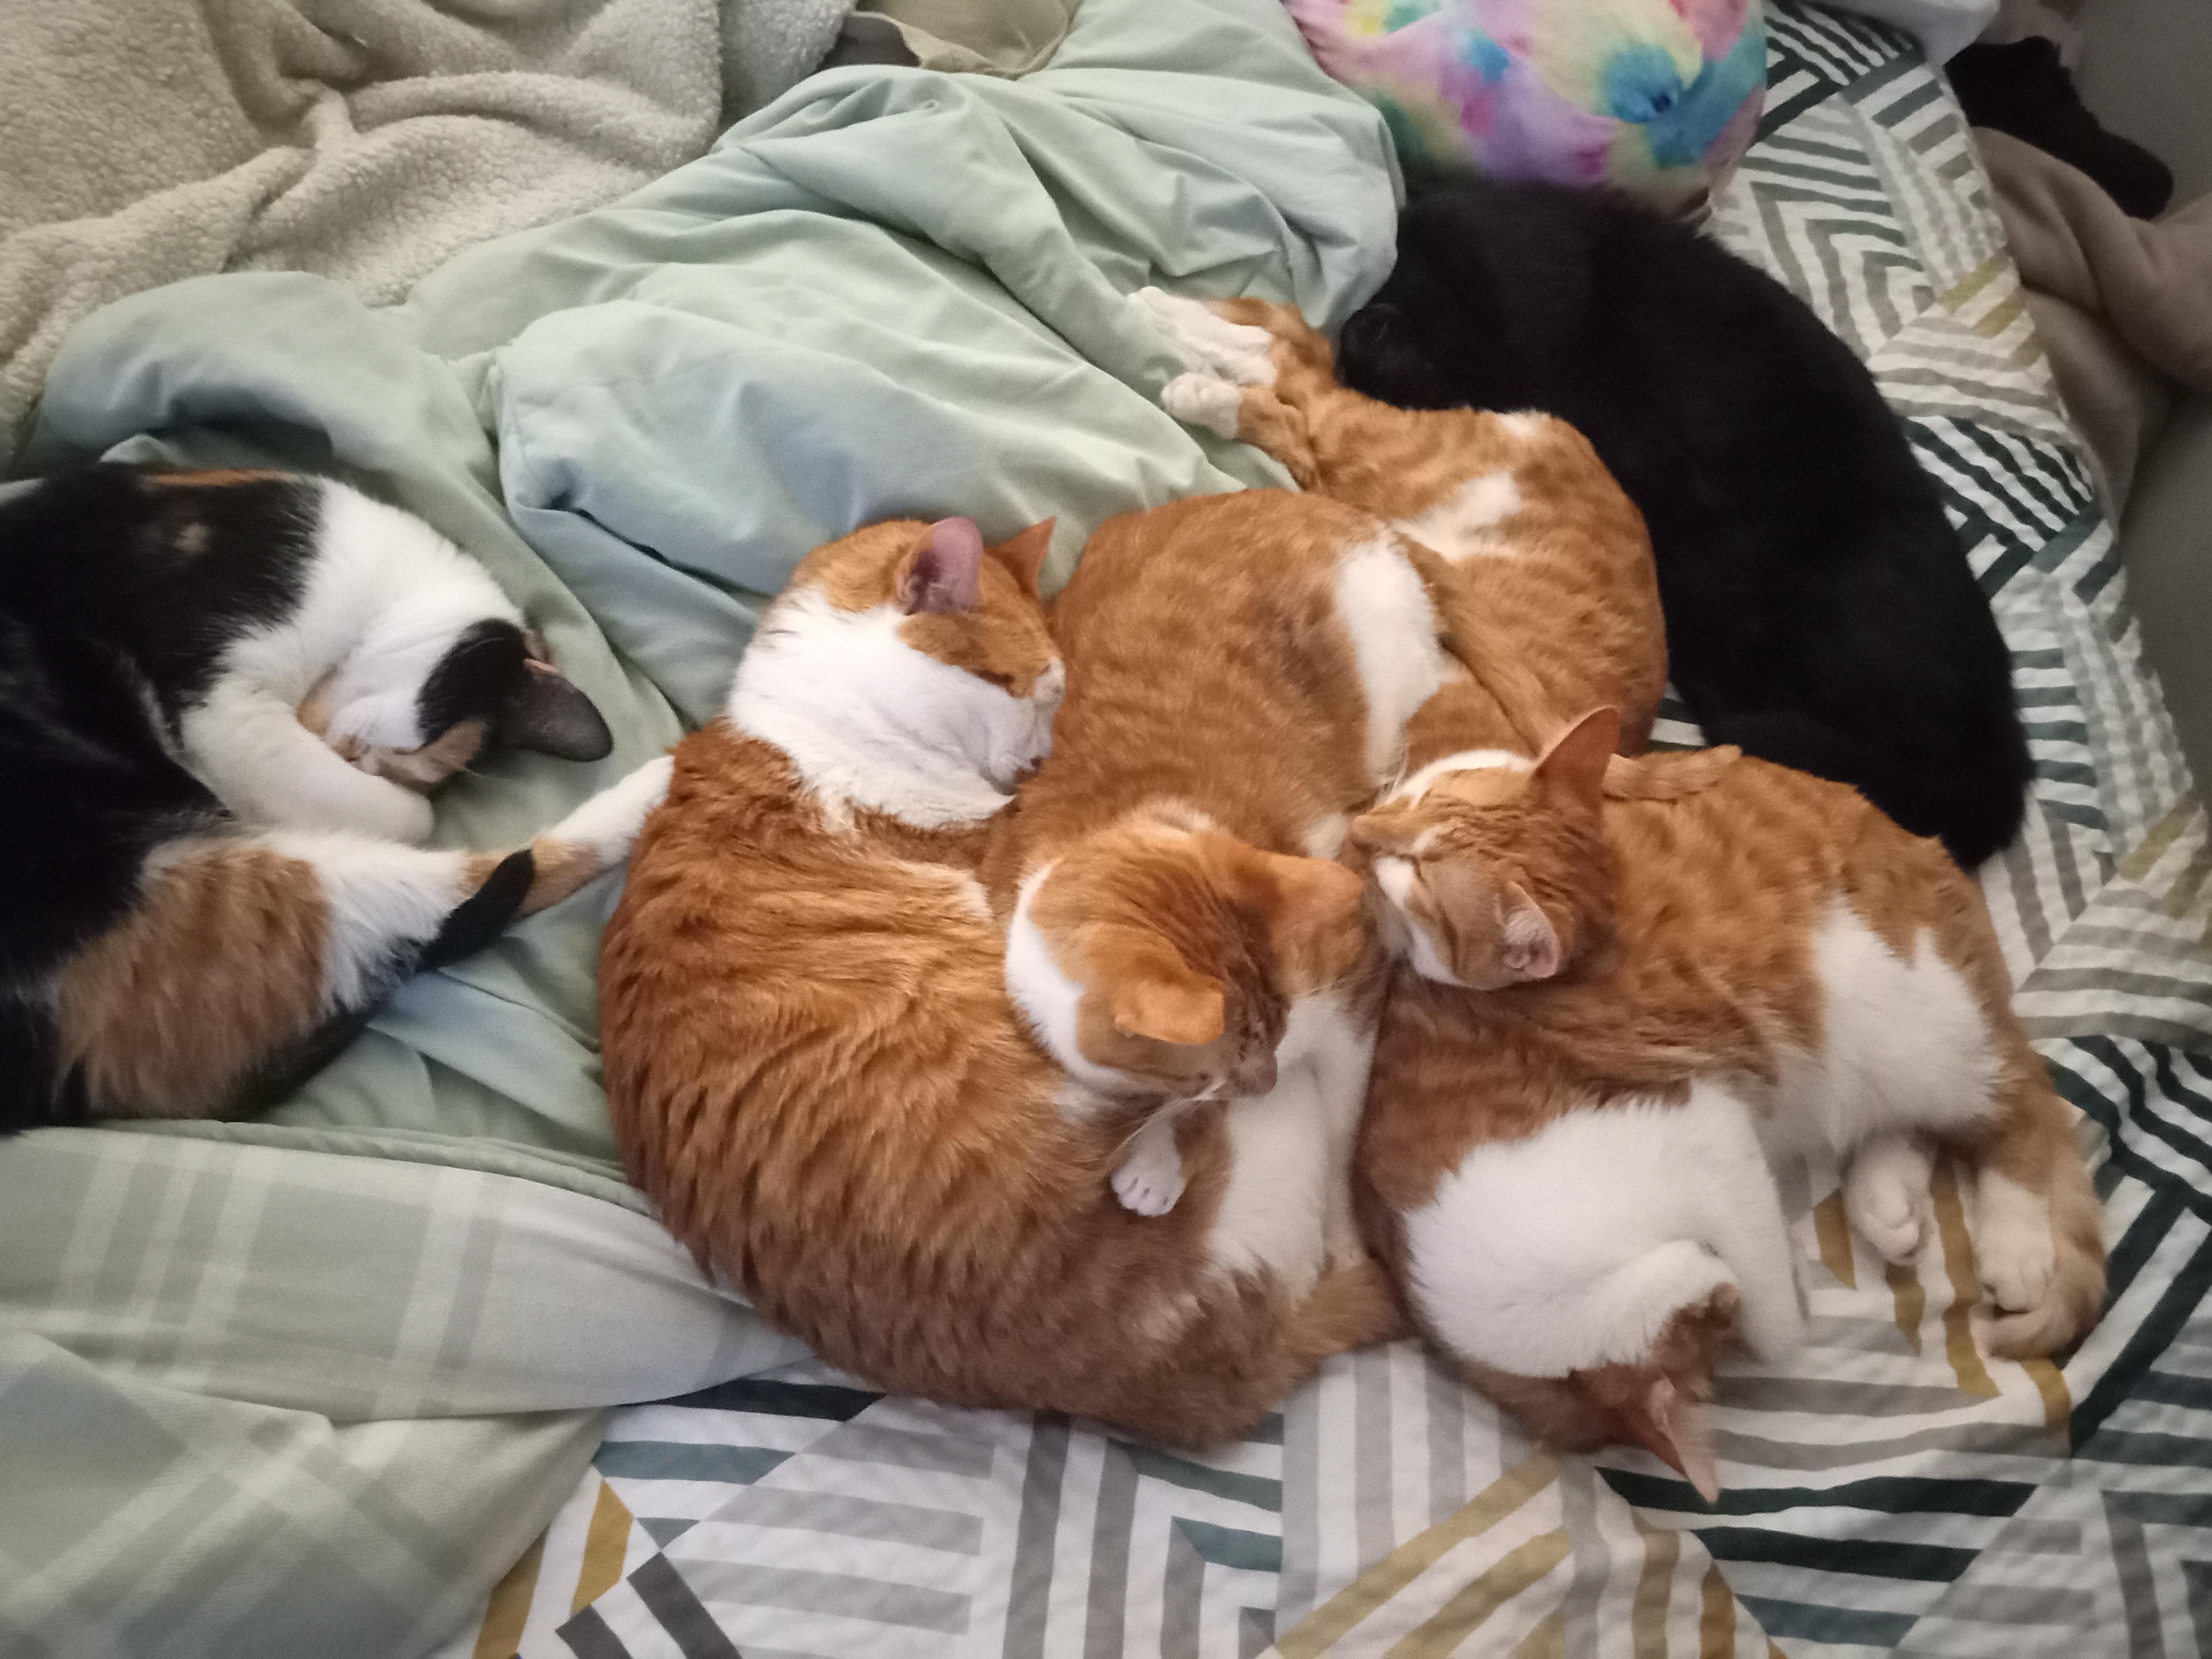 a picture of Odin, Freya, Vlad, Hela, Thor and Loki a cat that needs a foster home.